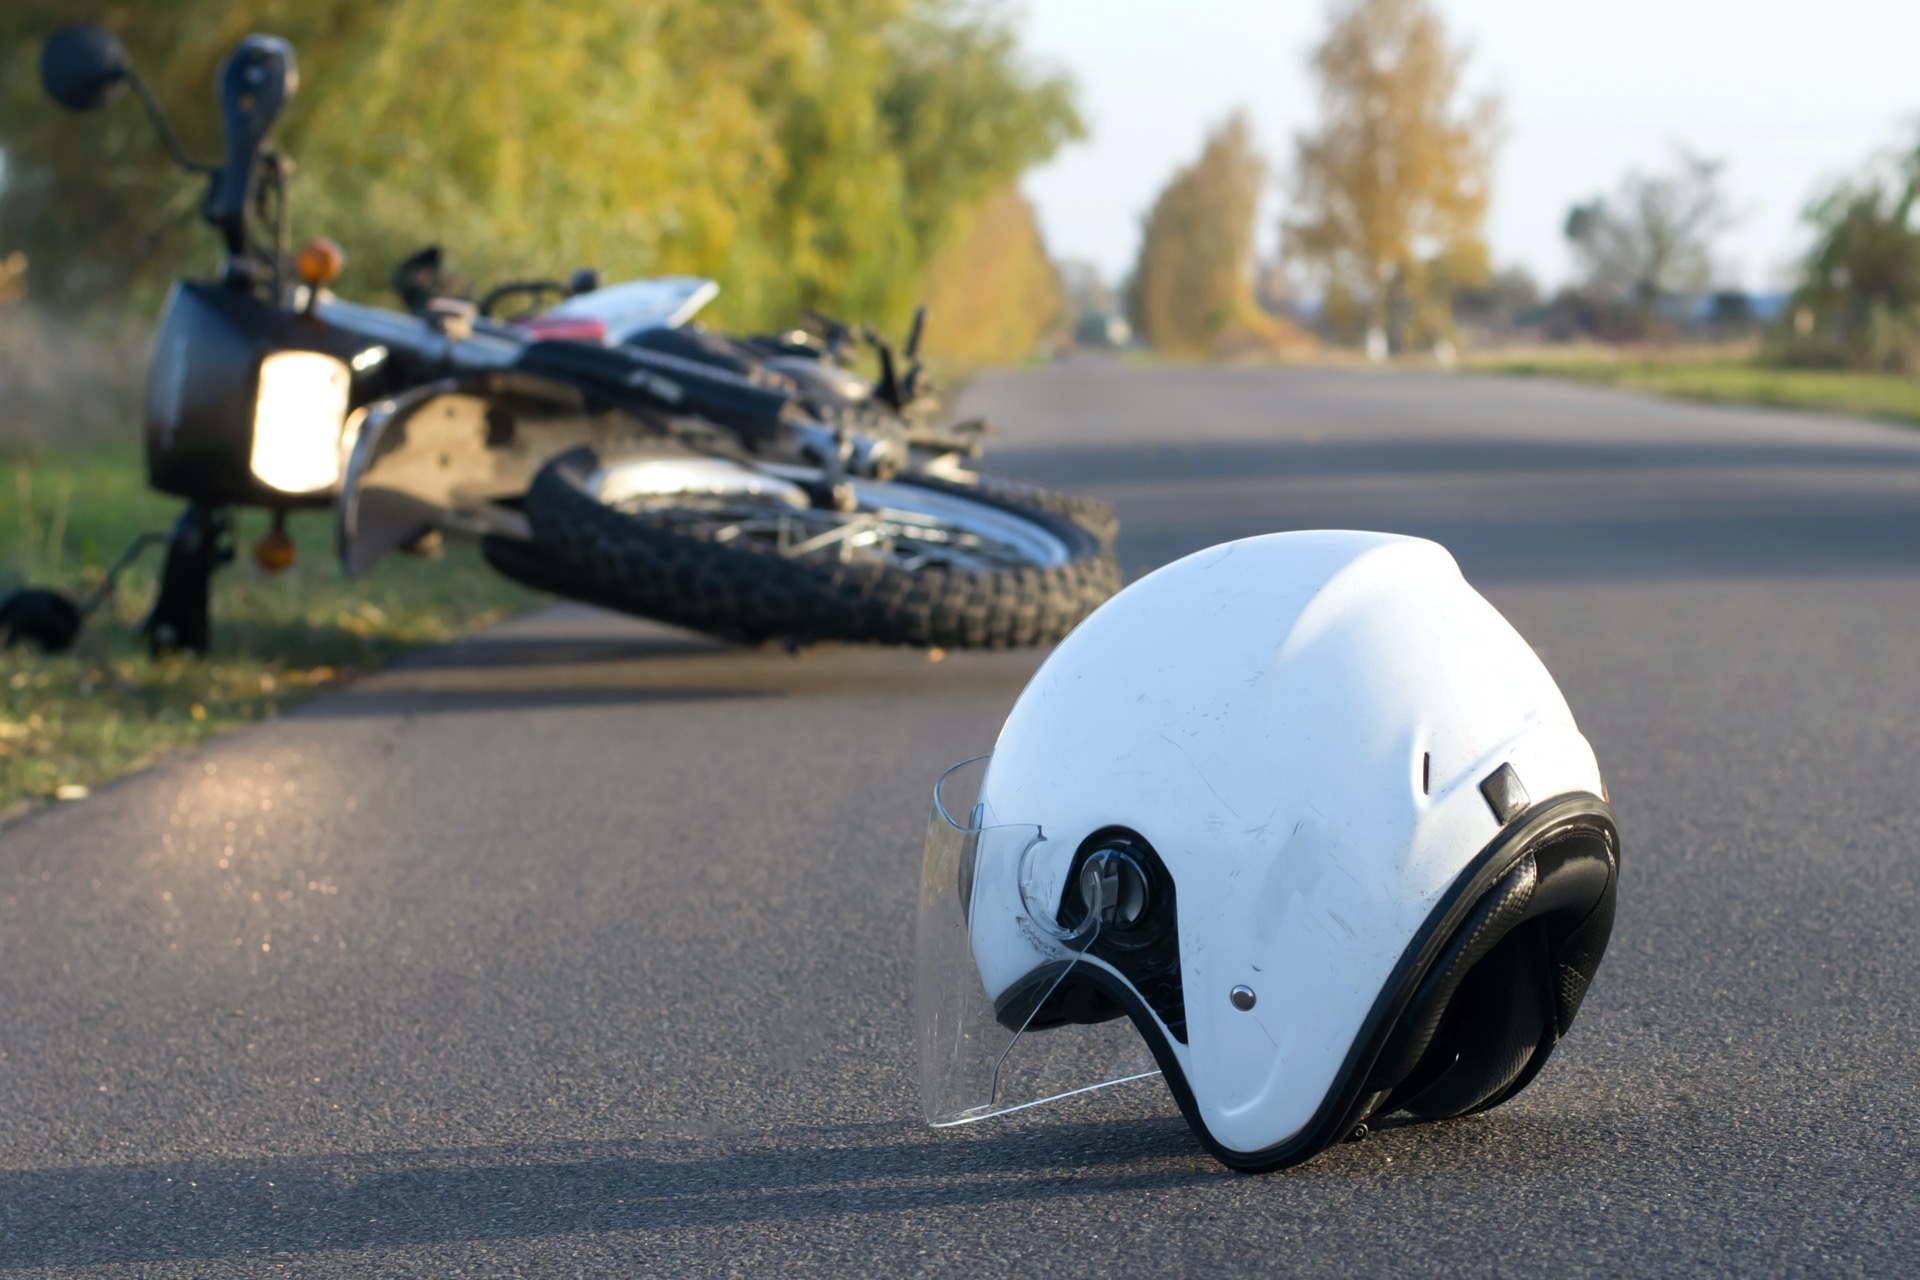 Motorcycle and helmet on the ground after the accident